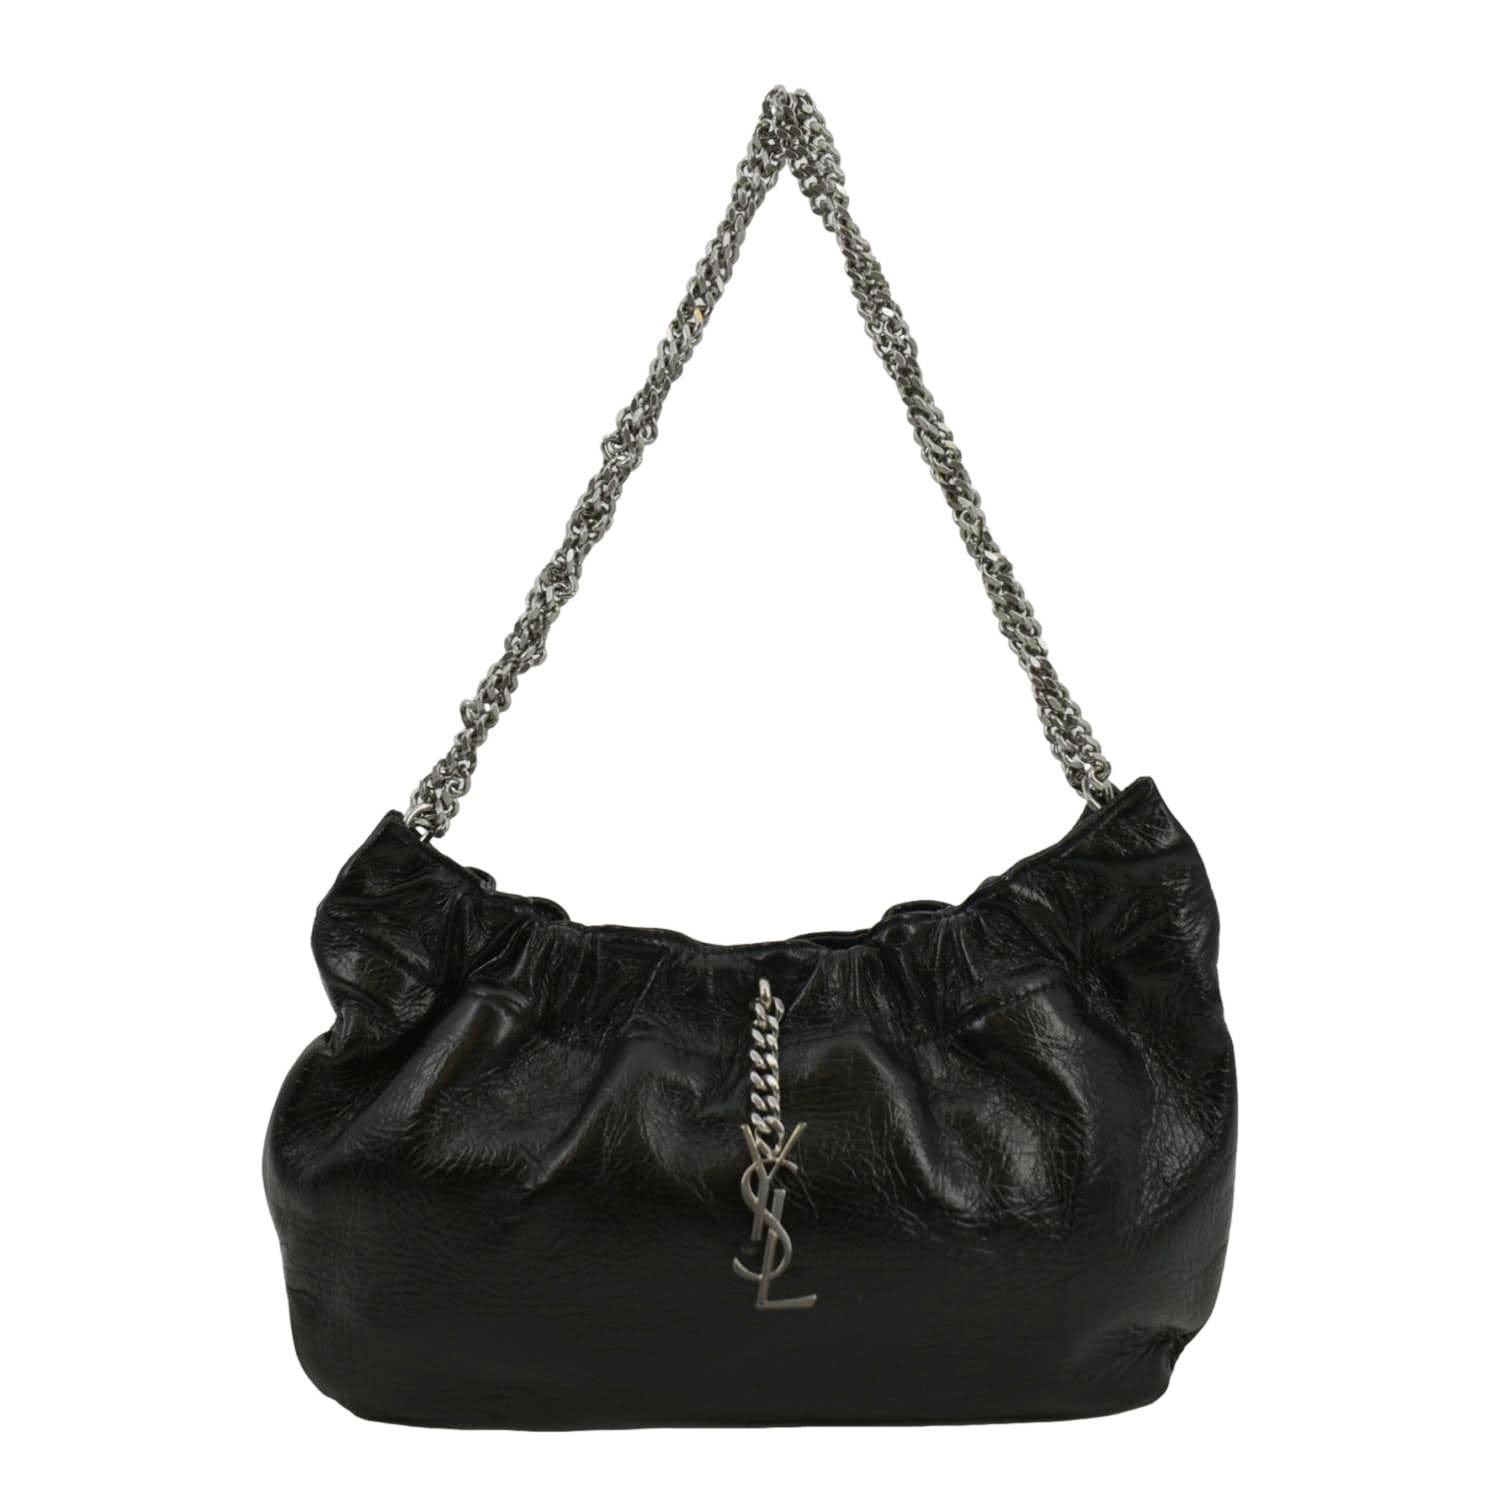 Yves Saint Laurent Pac Pac Ruched Leather Hobo Bag Black